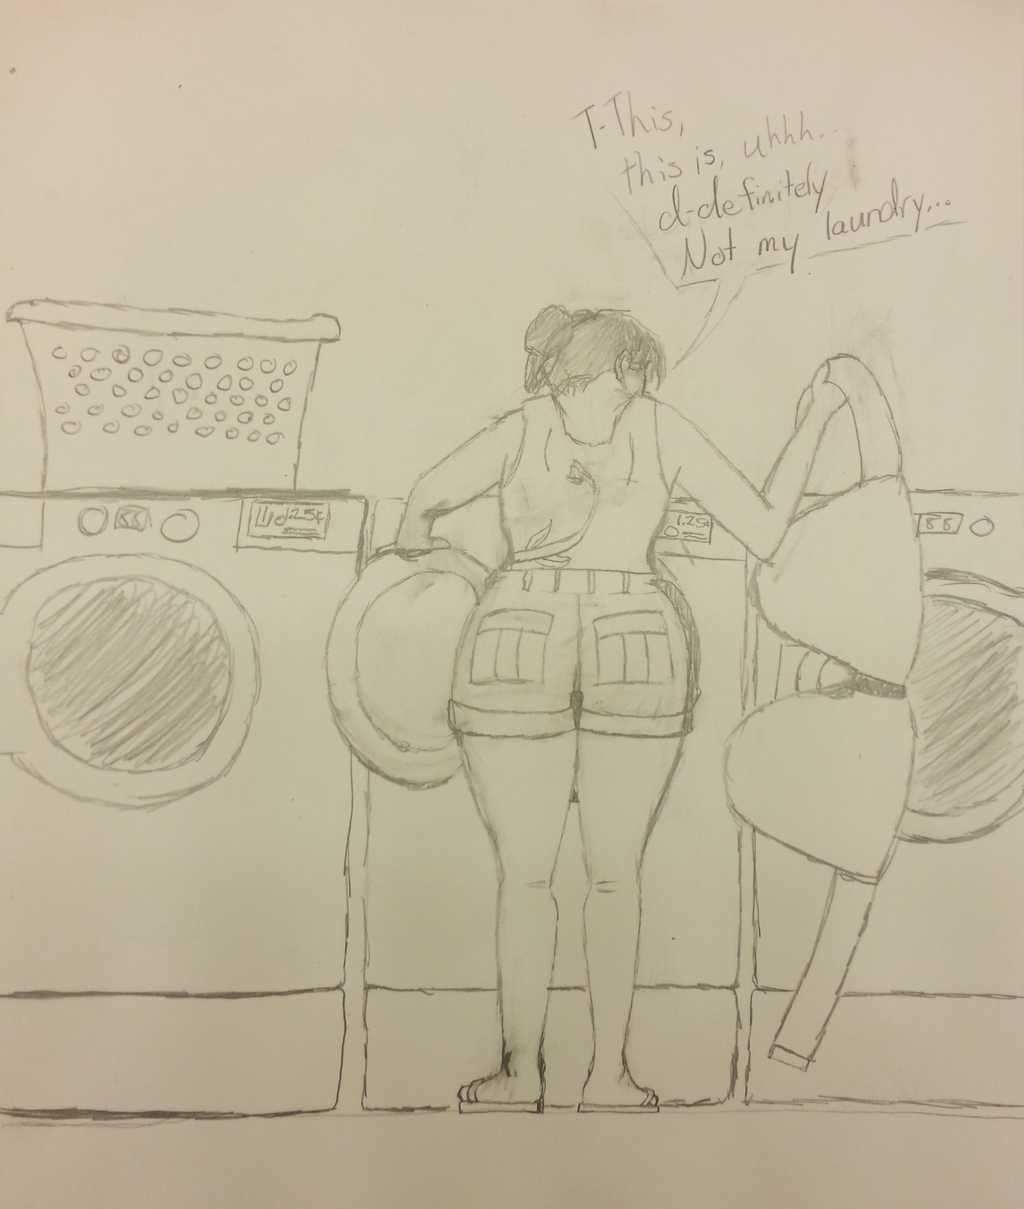 Most recent image: Wrong Machine at the Laundromat